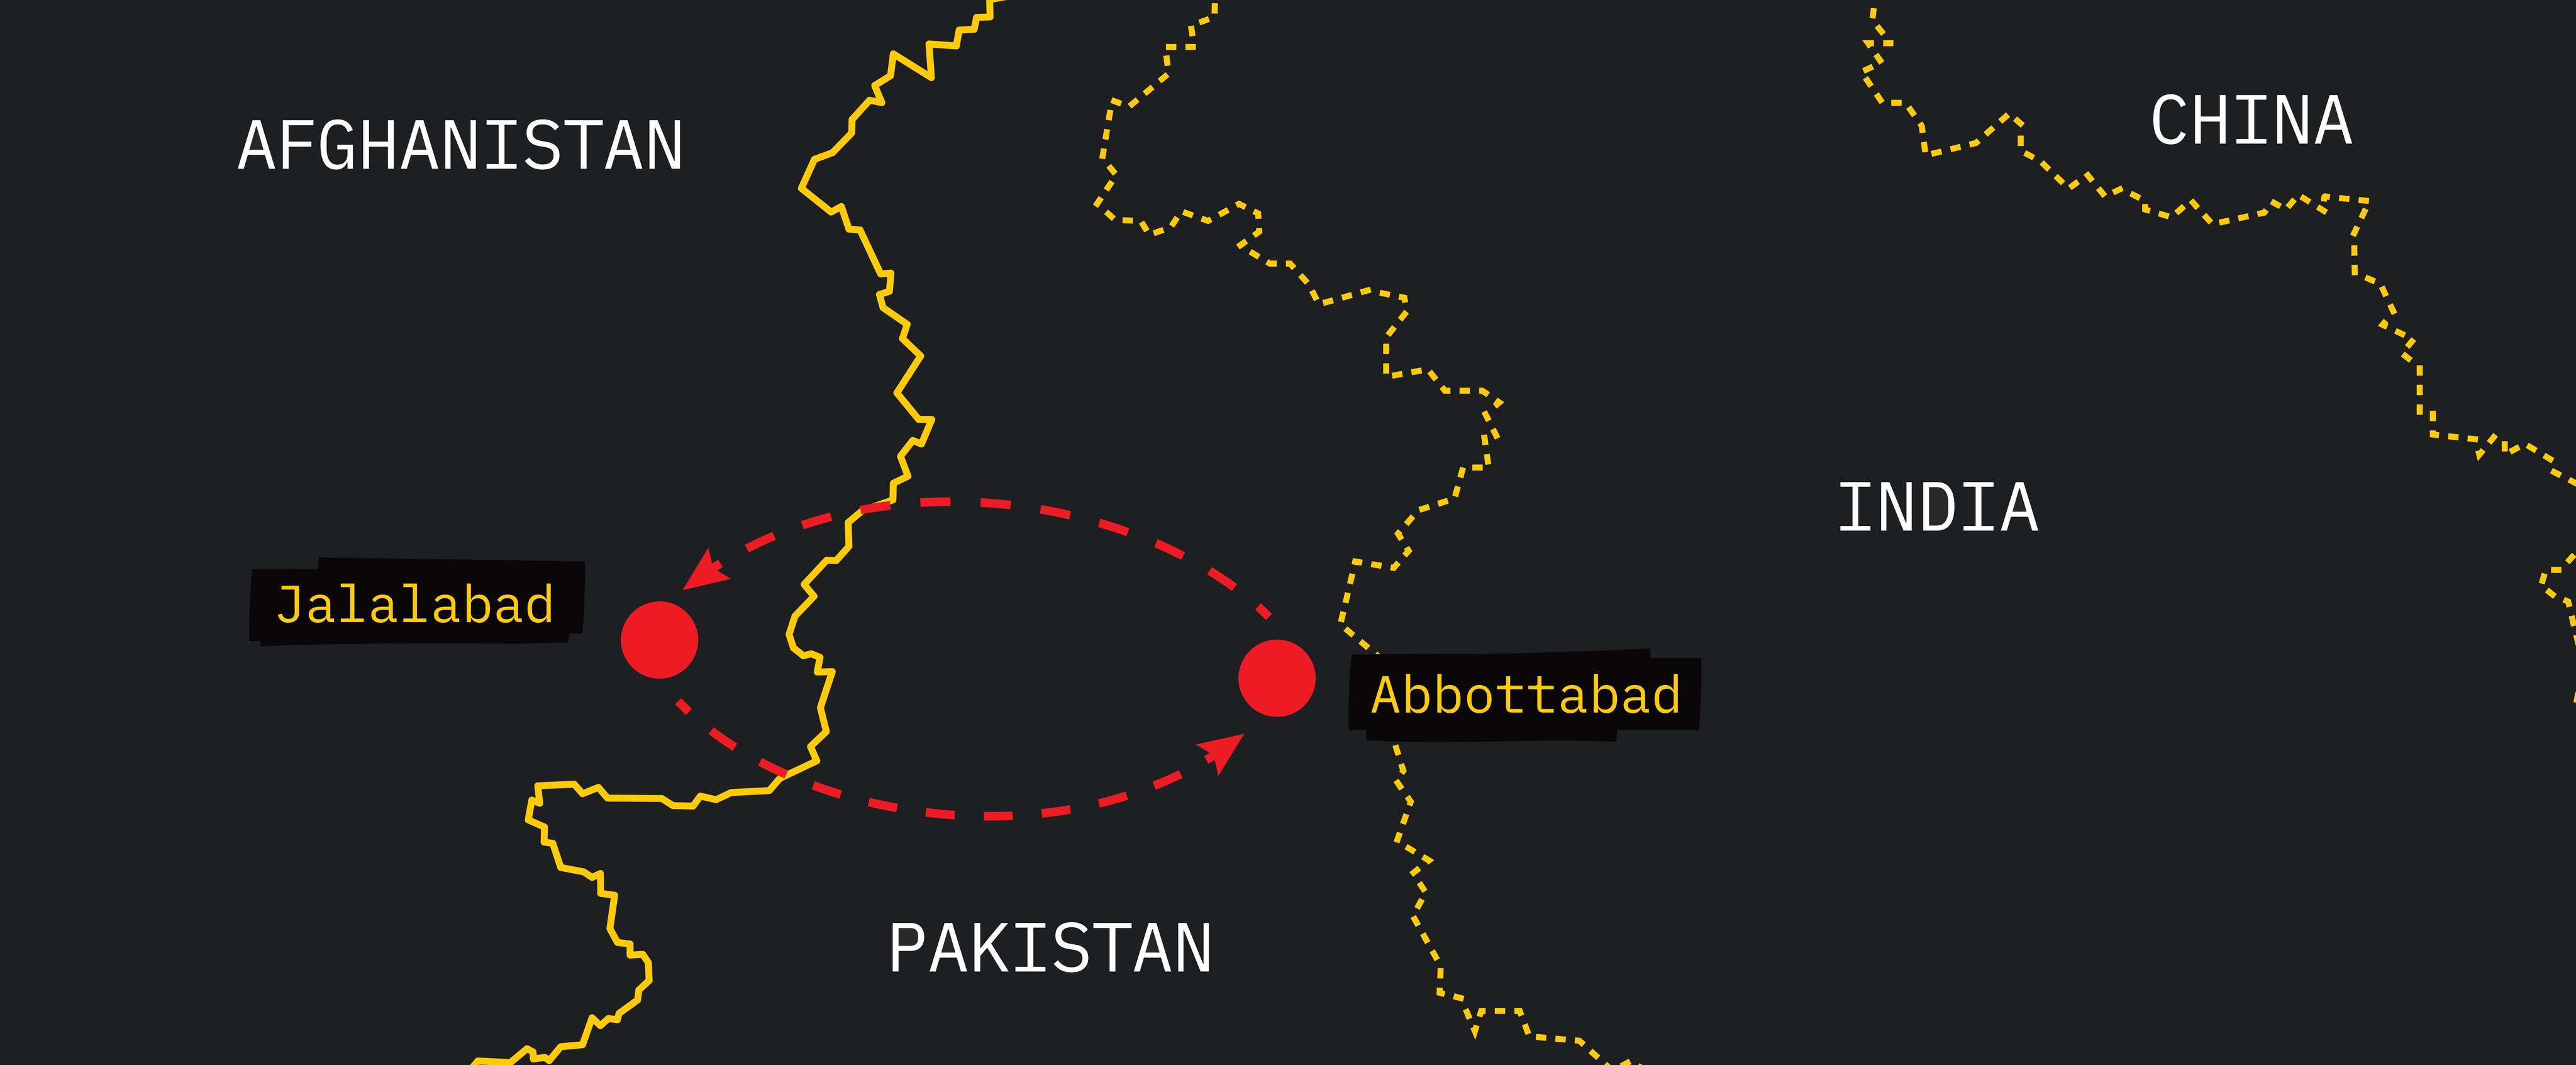 Graphic map showing dotted connection between Jalalabad in Afghanistan and Abbottabad in Pakistan. 